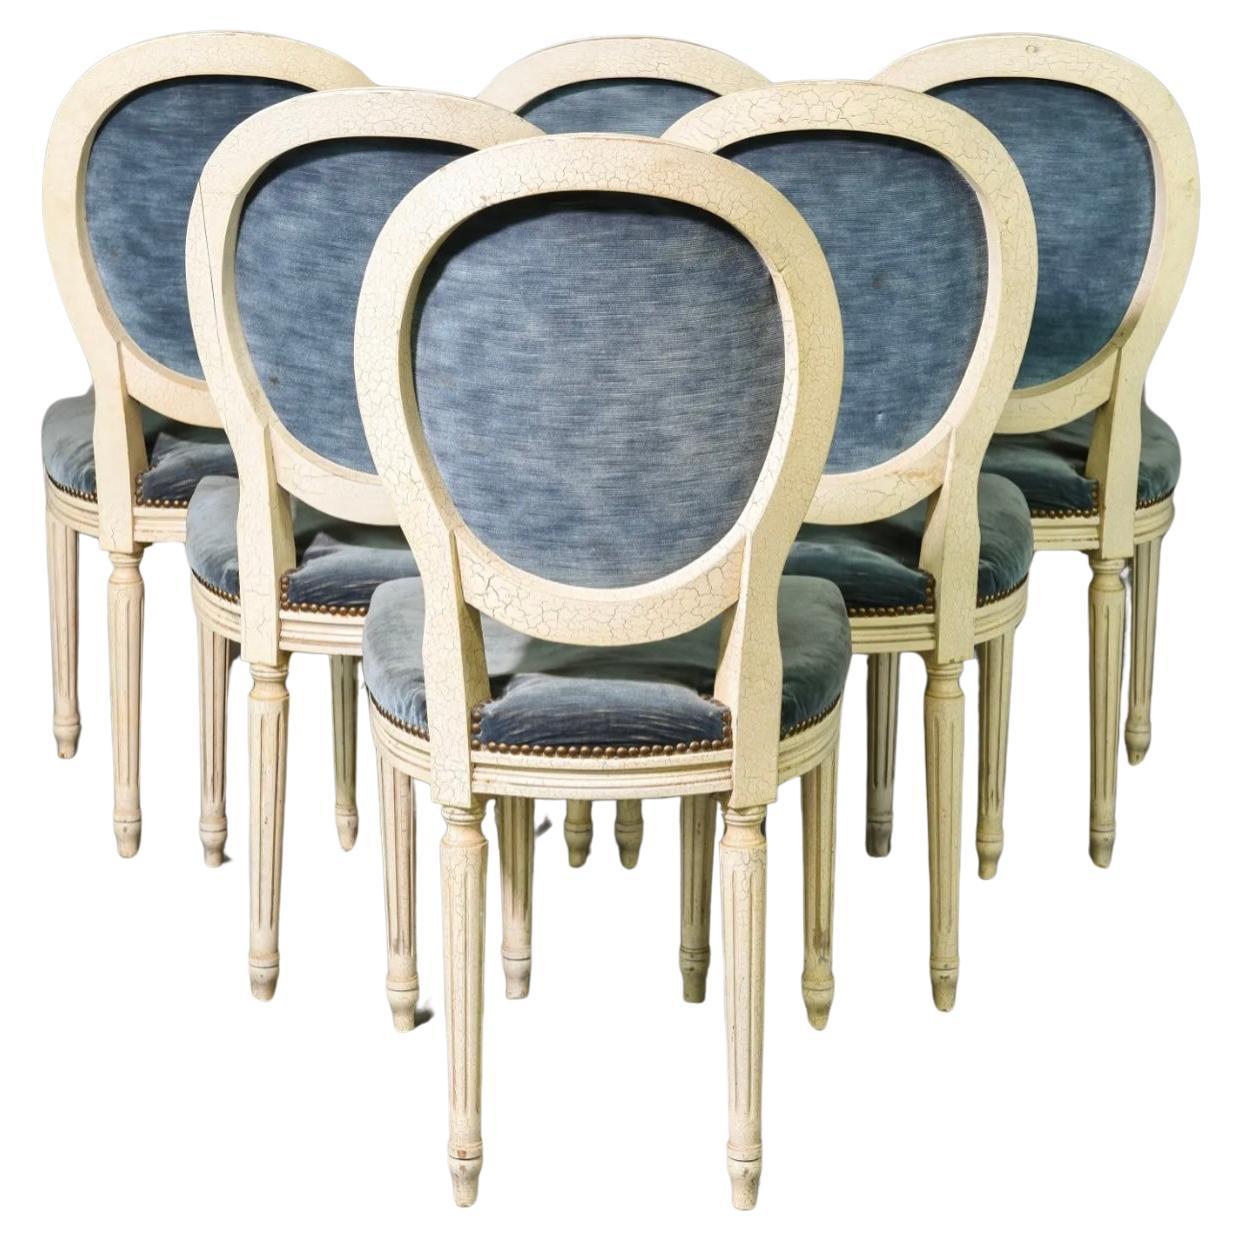 Set of 6 French Louis XVI Style Painted Balloon Back Chairs. Each chair features hand-molded frame with an oval-shaped medallion back, and are upholstered in soft blue fabric with brass-tack nail head trim. Chairs are supported by tapered fluted